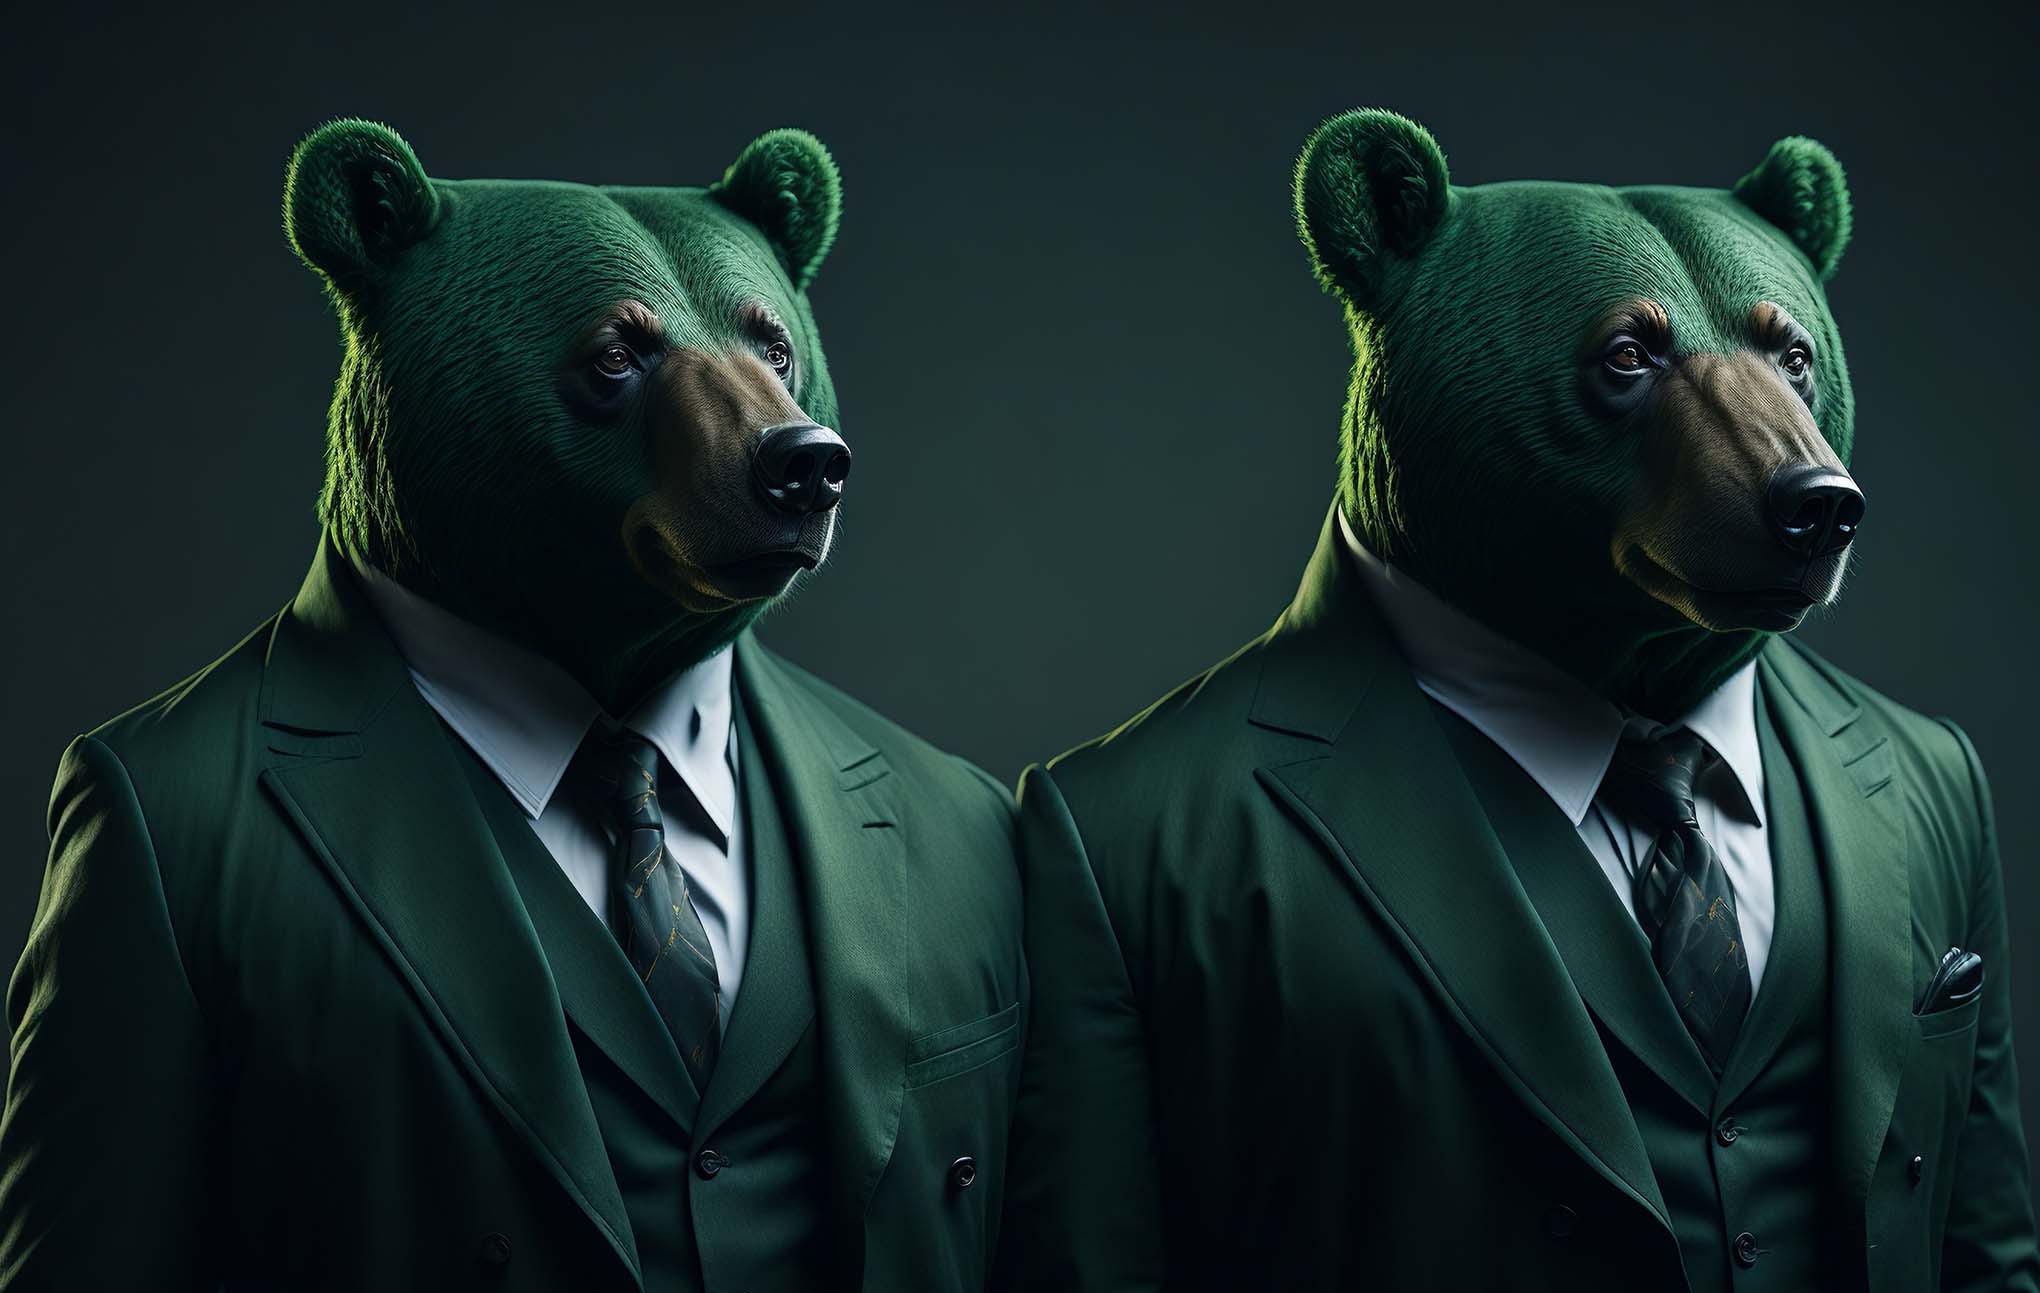 Two anthropomorphic bears in dark green suits, elegantly poised against a dim, greenish background. they exude a serious demeanor with a subtle light highlighting the texture of their fur and suits.